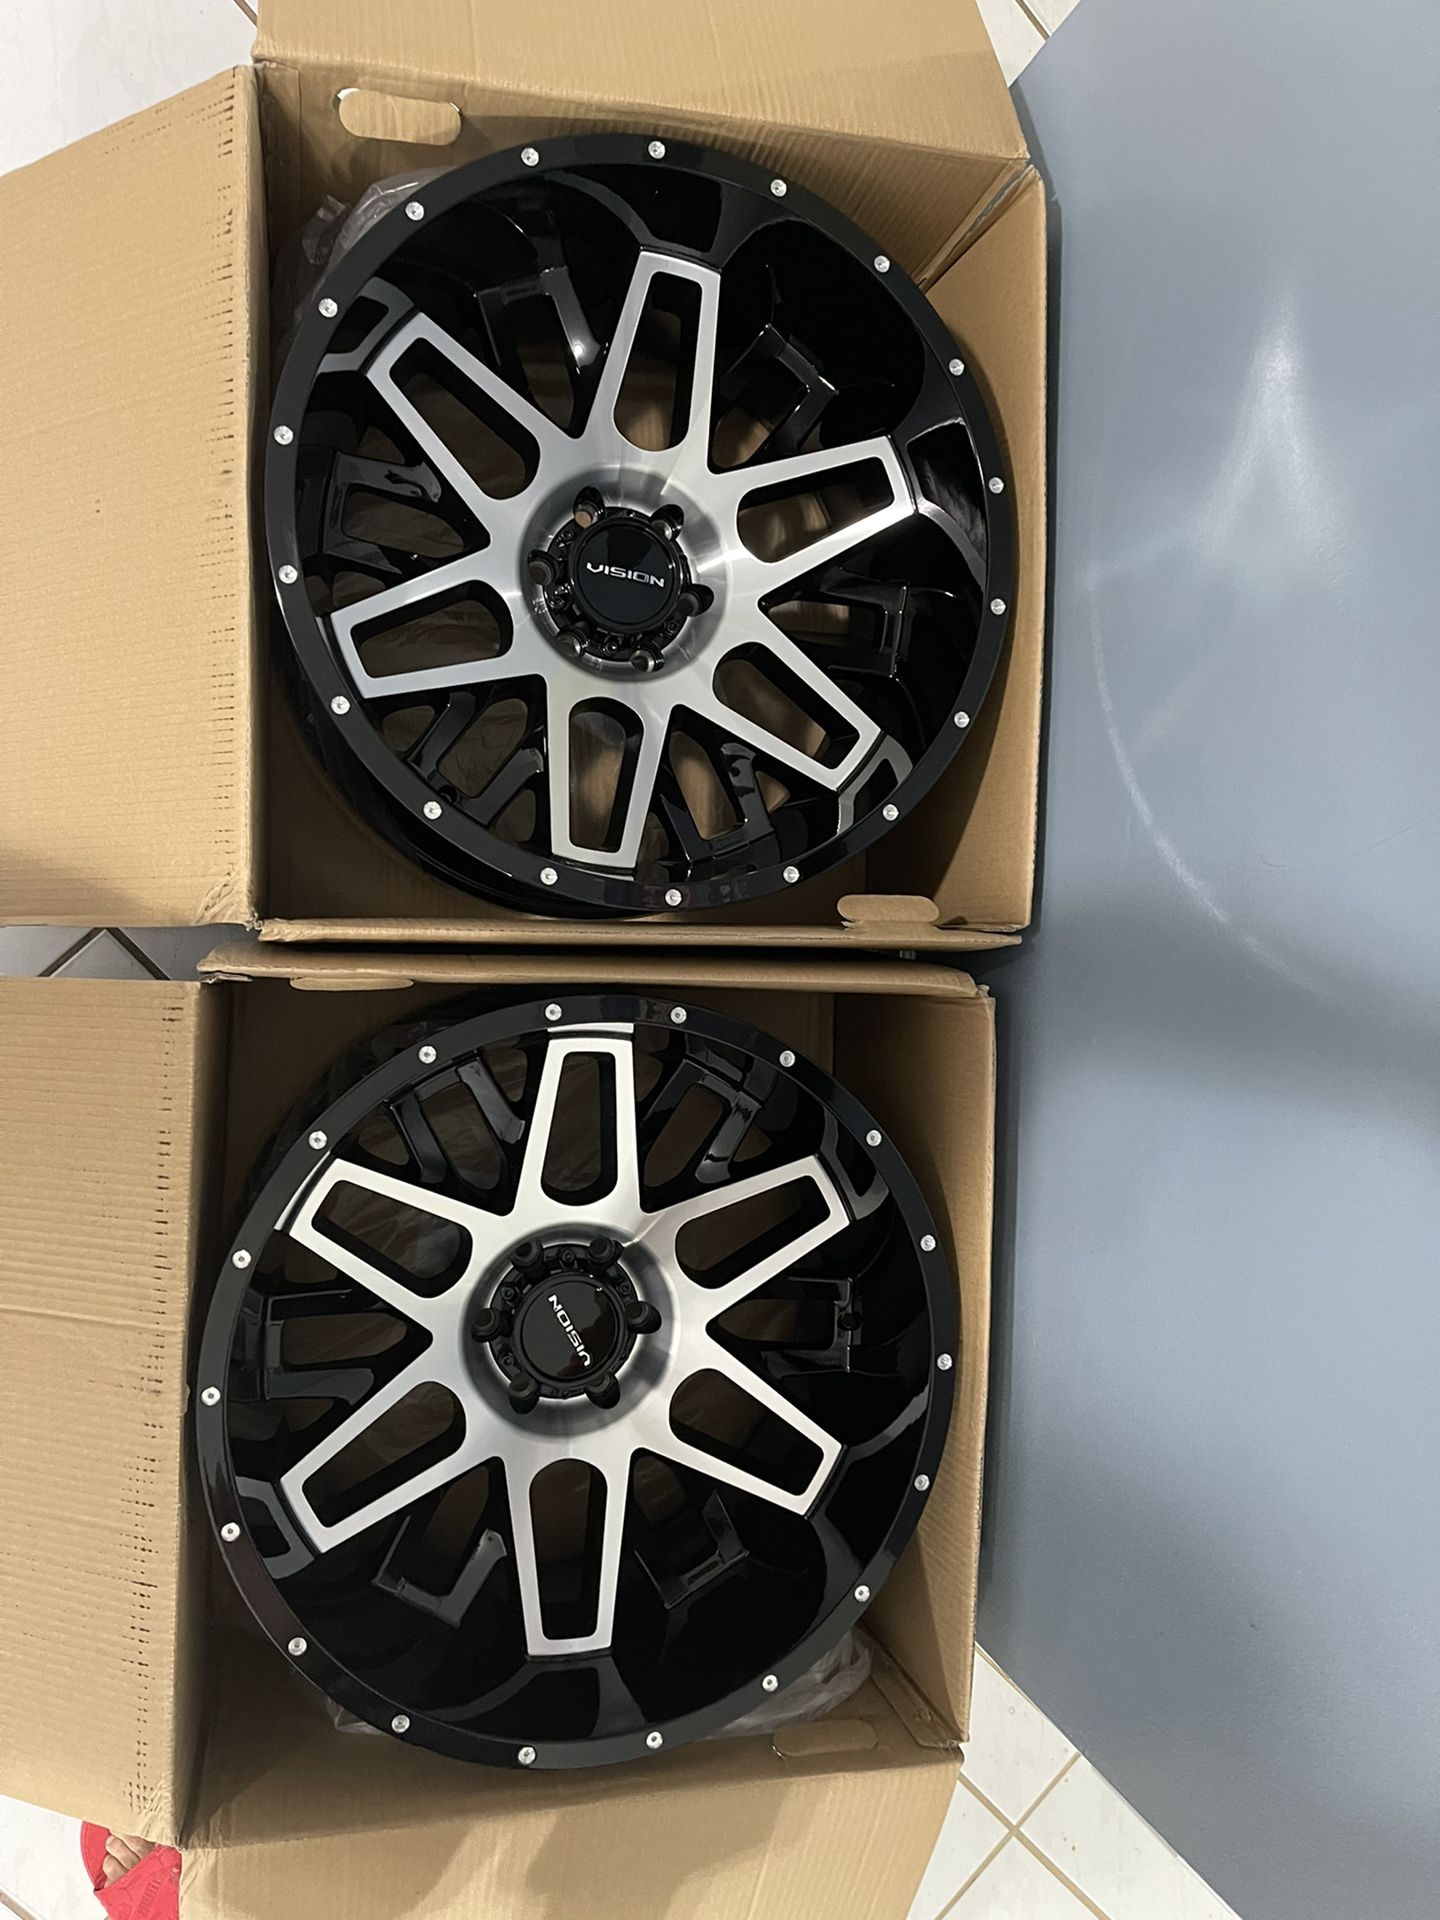 22x12 New Set Of 4 Wheels For Chevy 1500, GMC, Tacoma,Tahoe , Expeditions Much More And 2019 Ram 1500 Bolt Pattern 6x139.7